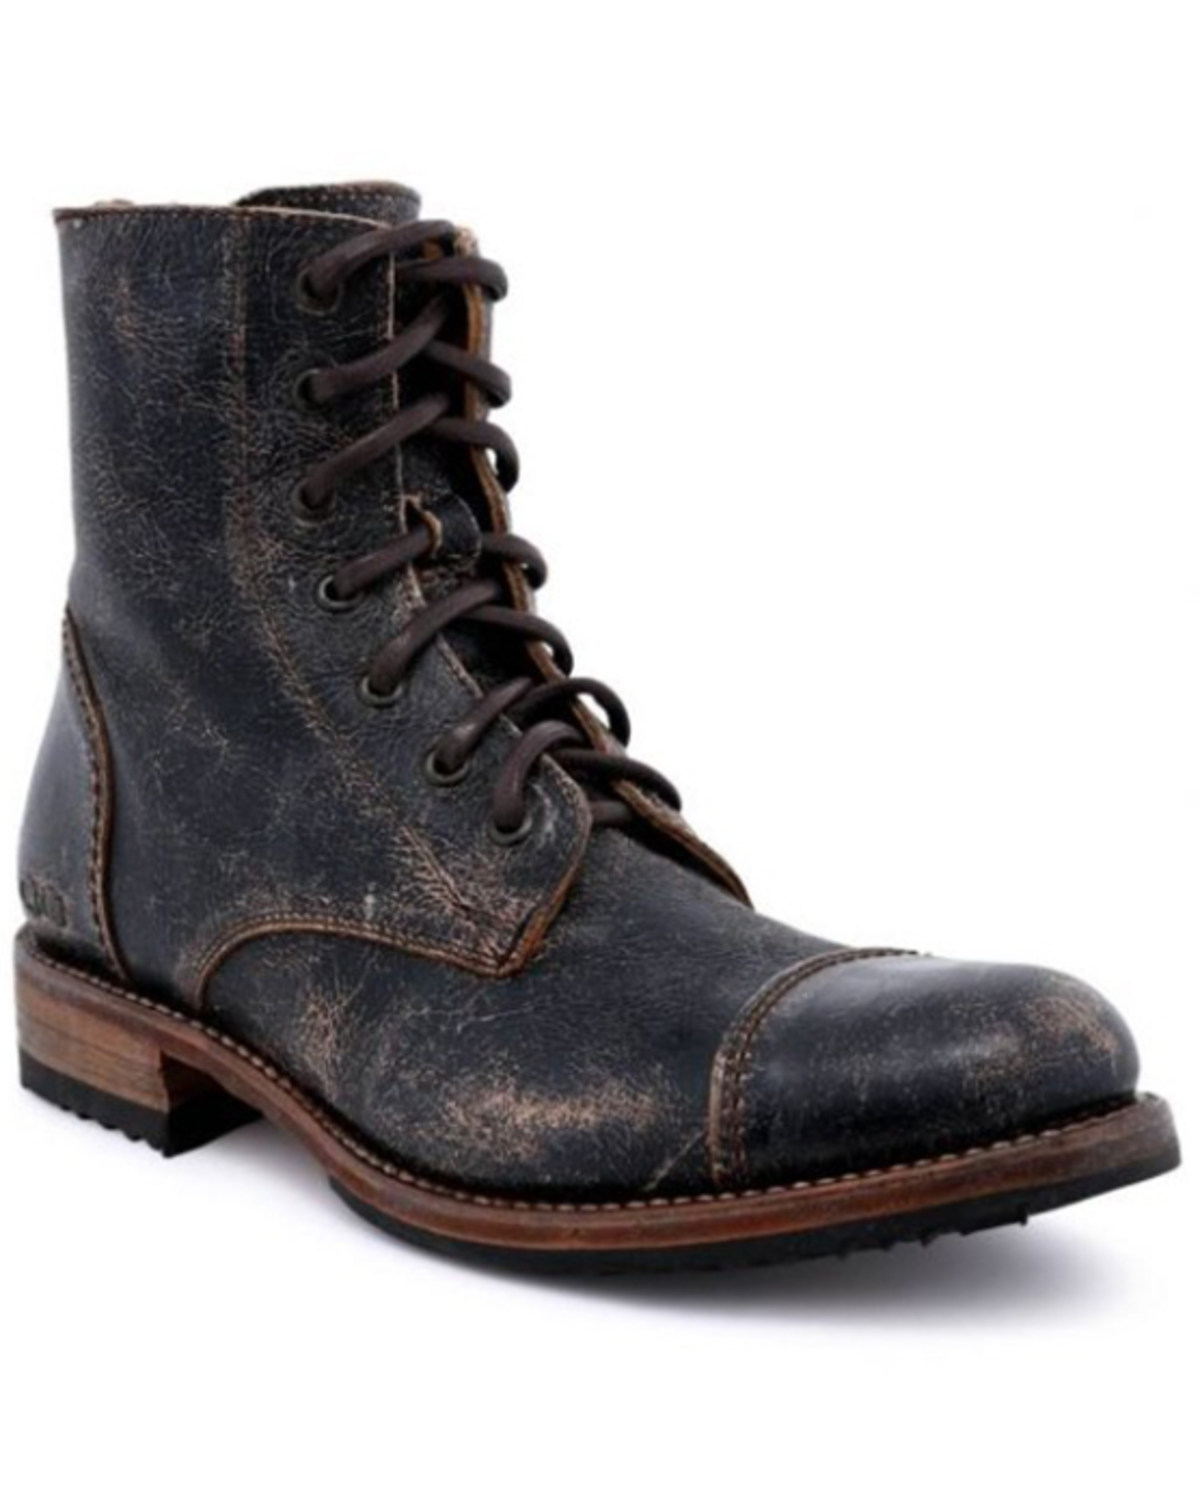 Bed Stu Men's Lux Protege Black Lace-Up Casual Boot - Round Toe